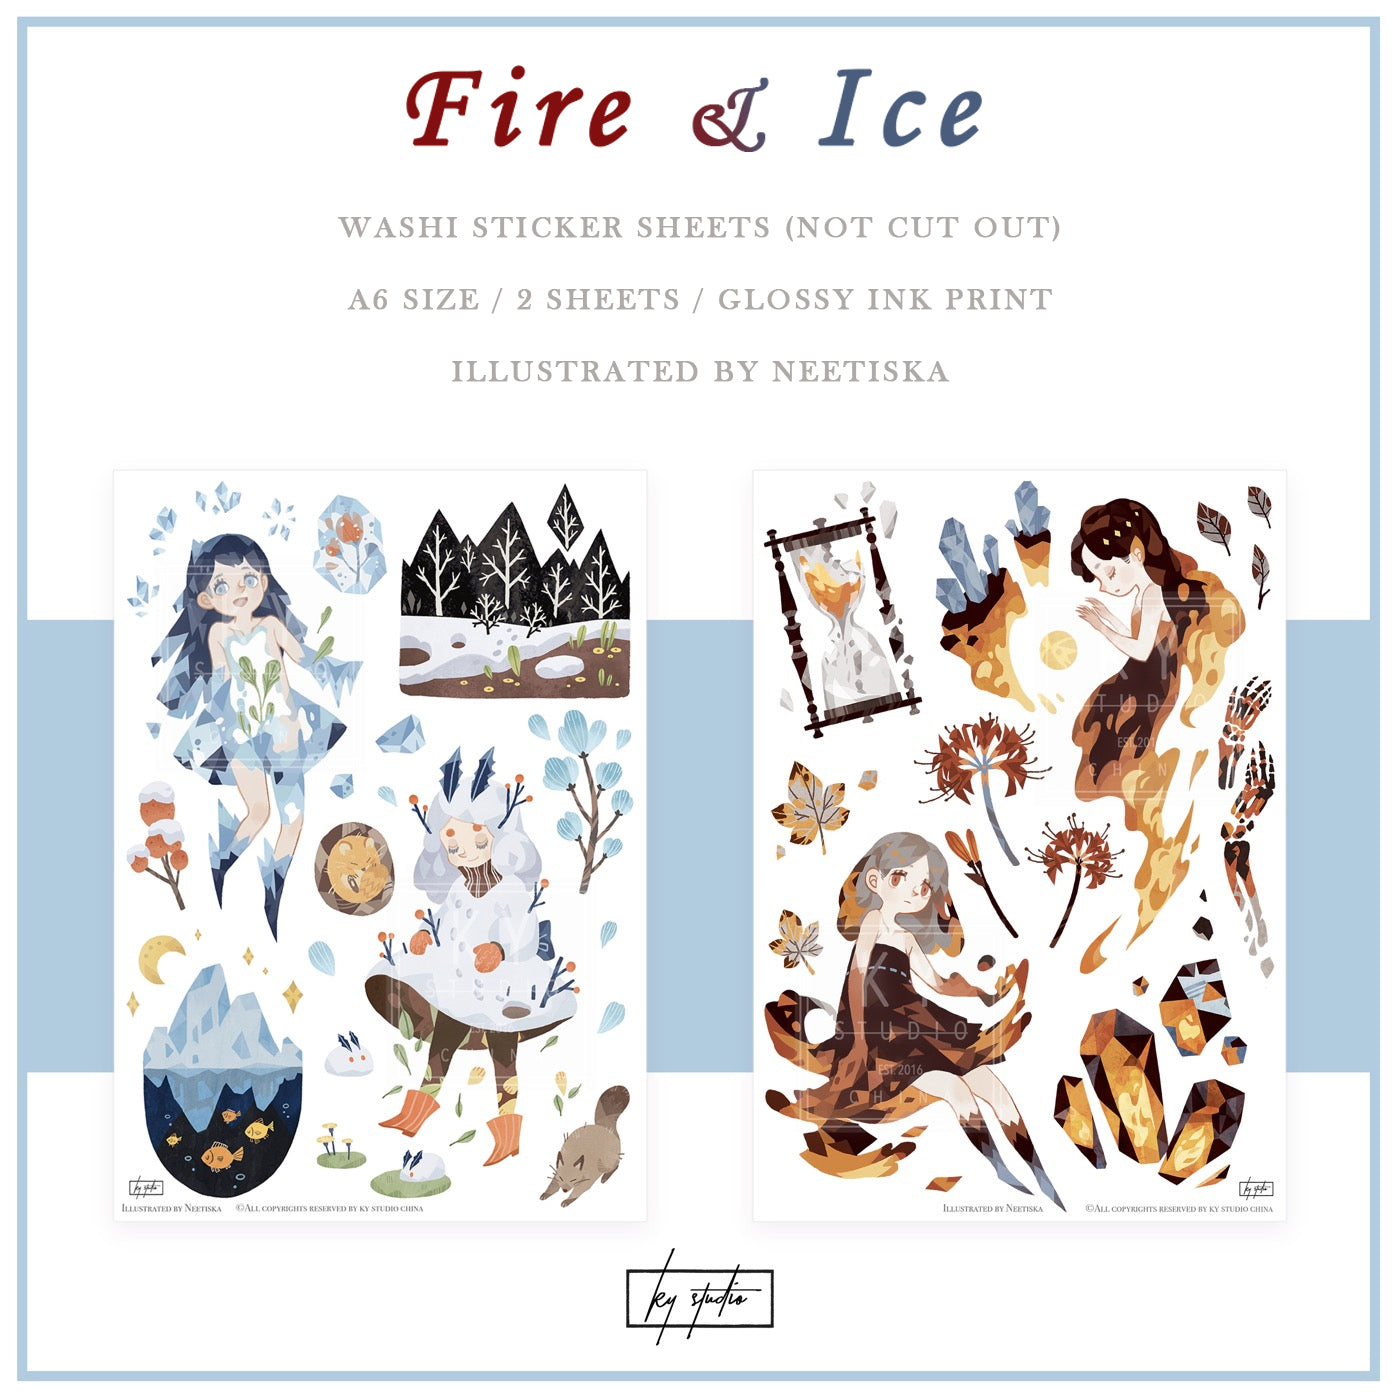 KY Studio: Fire and Ice Stickers Sheet